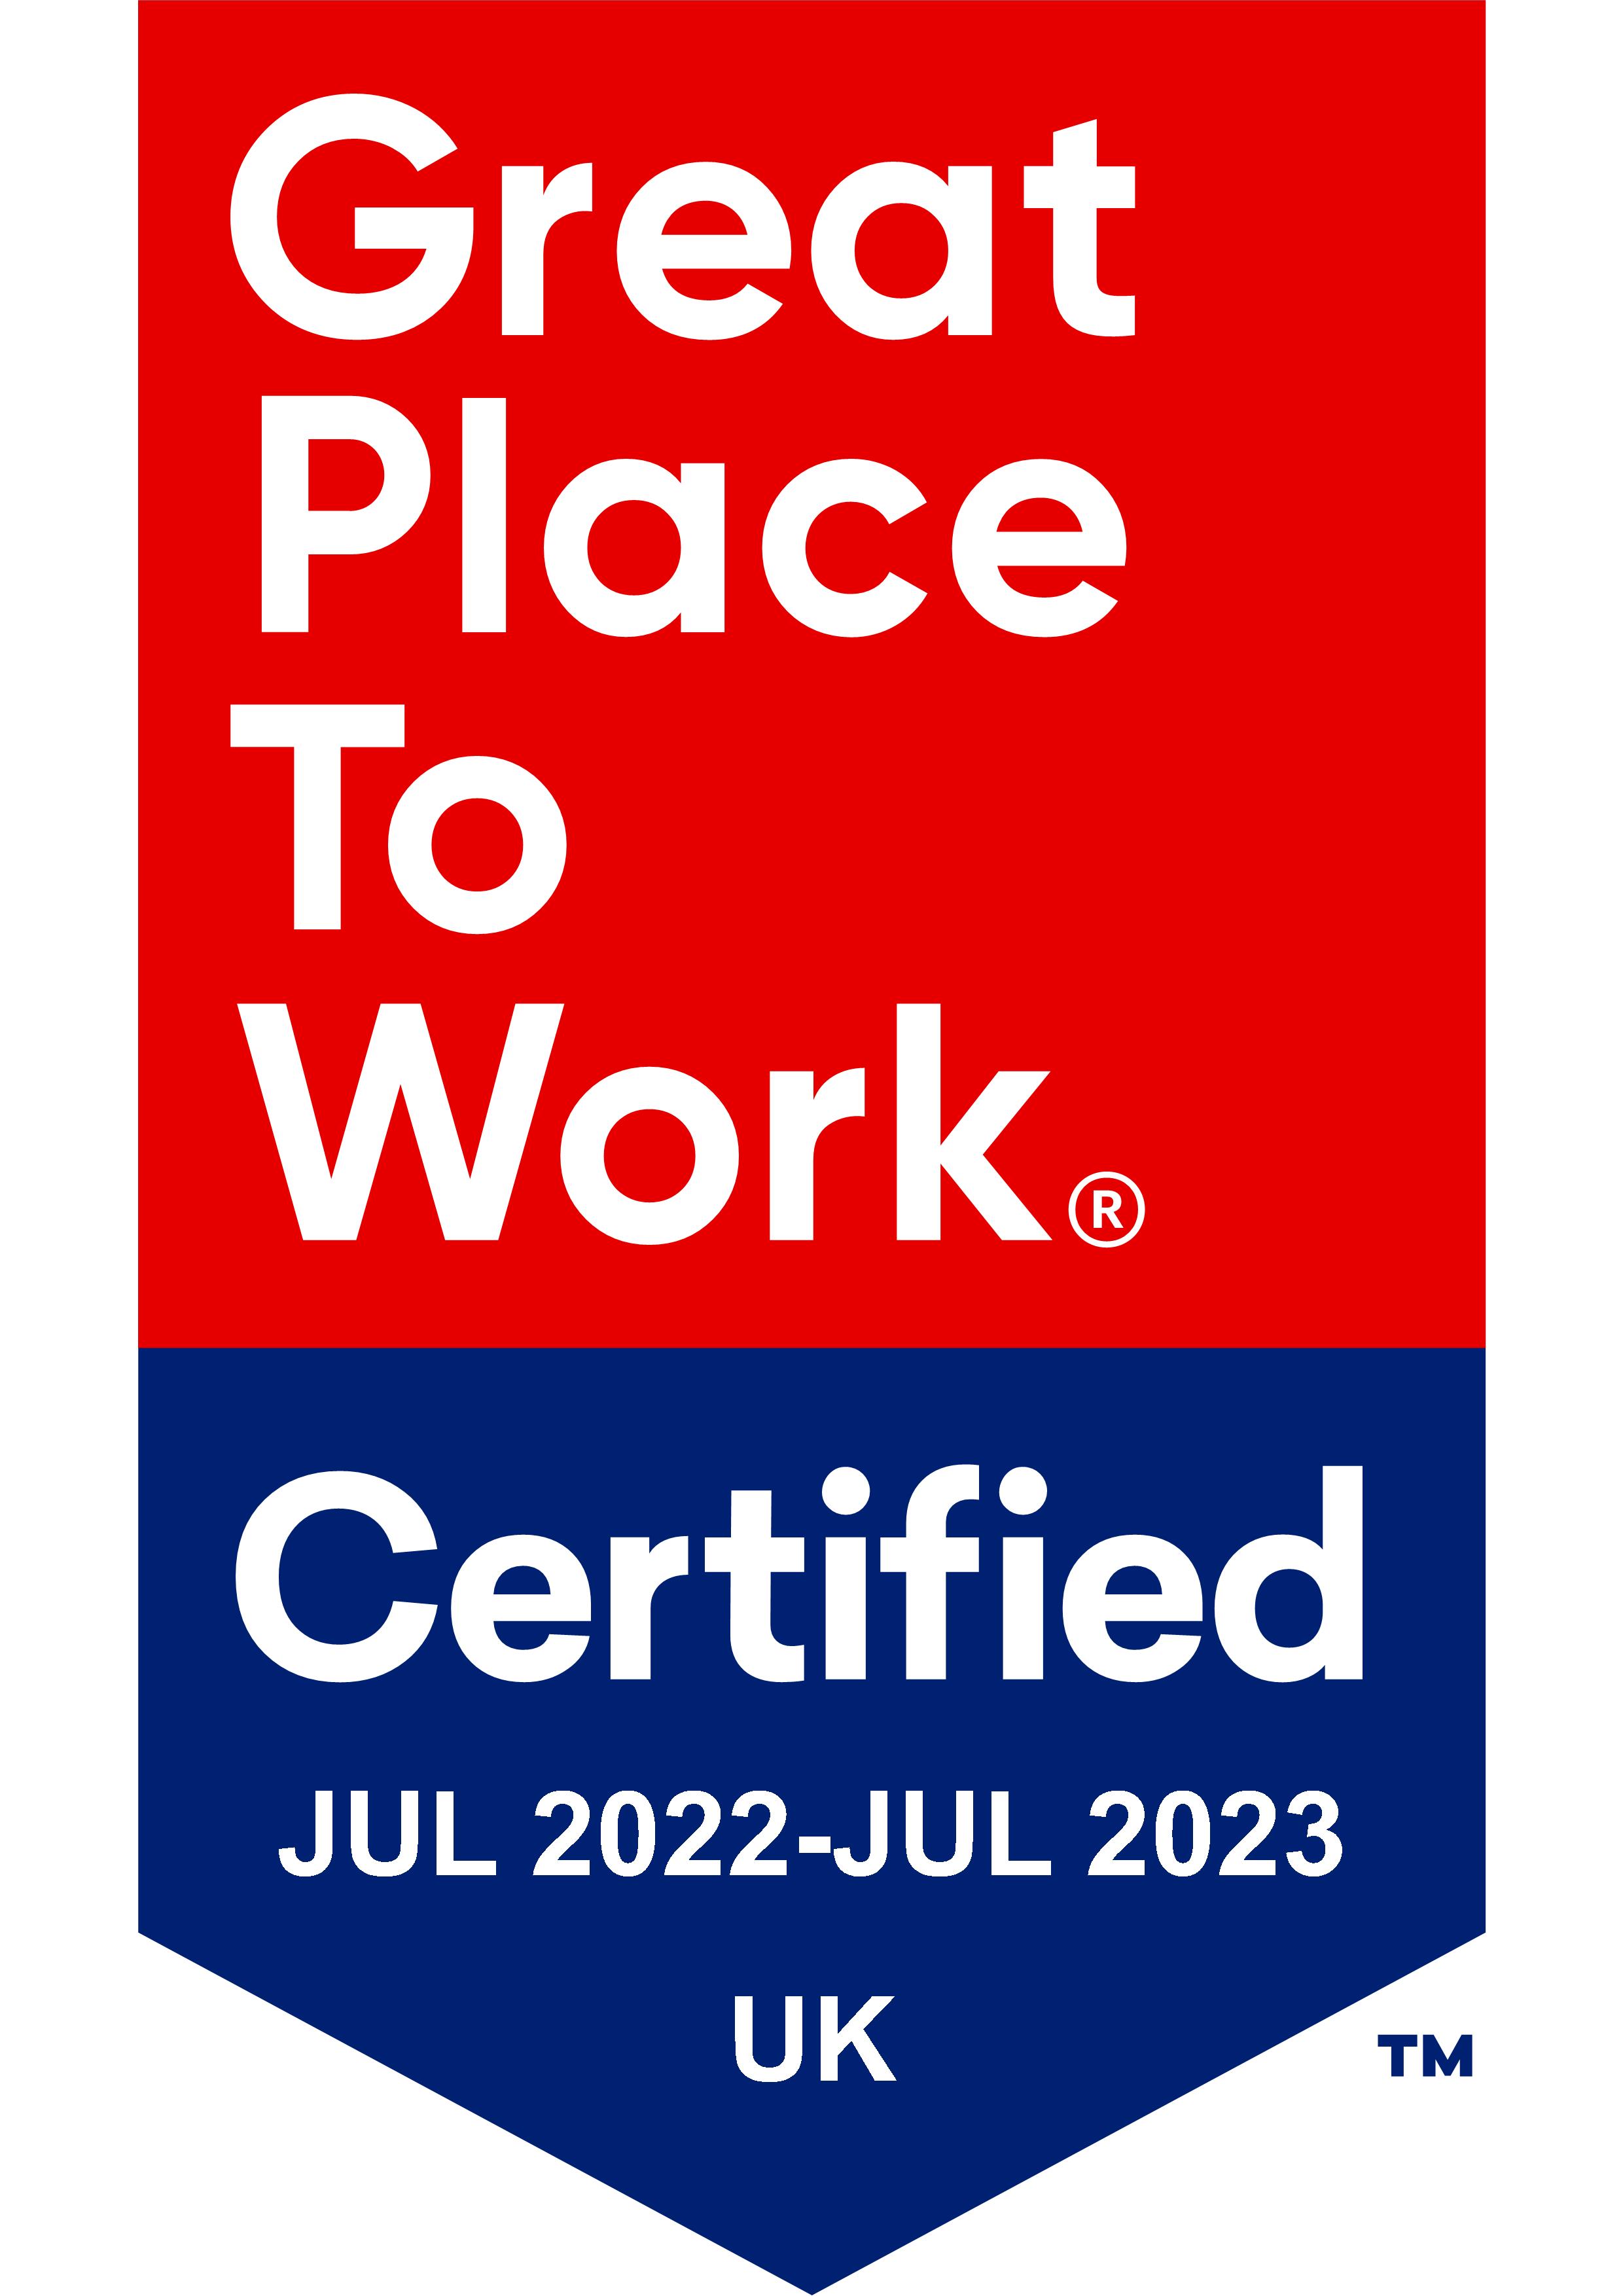 Channel 3 Consulting is a Great Place to Work â€“ itâ€™s official